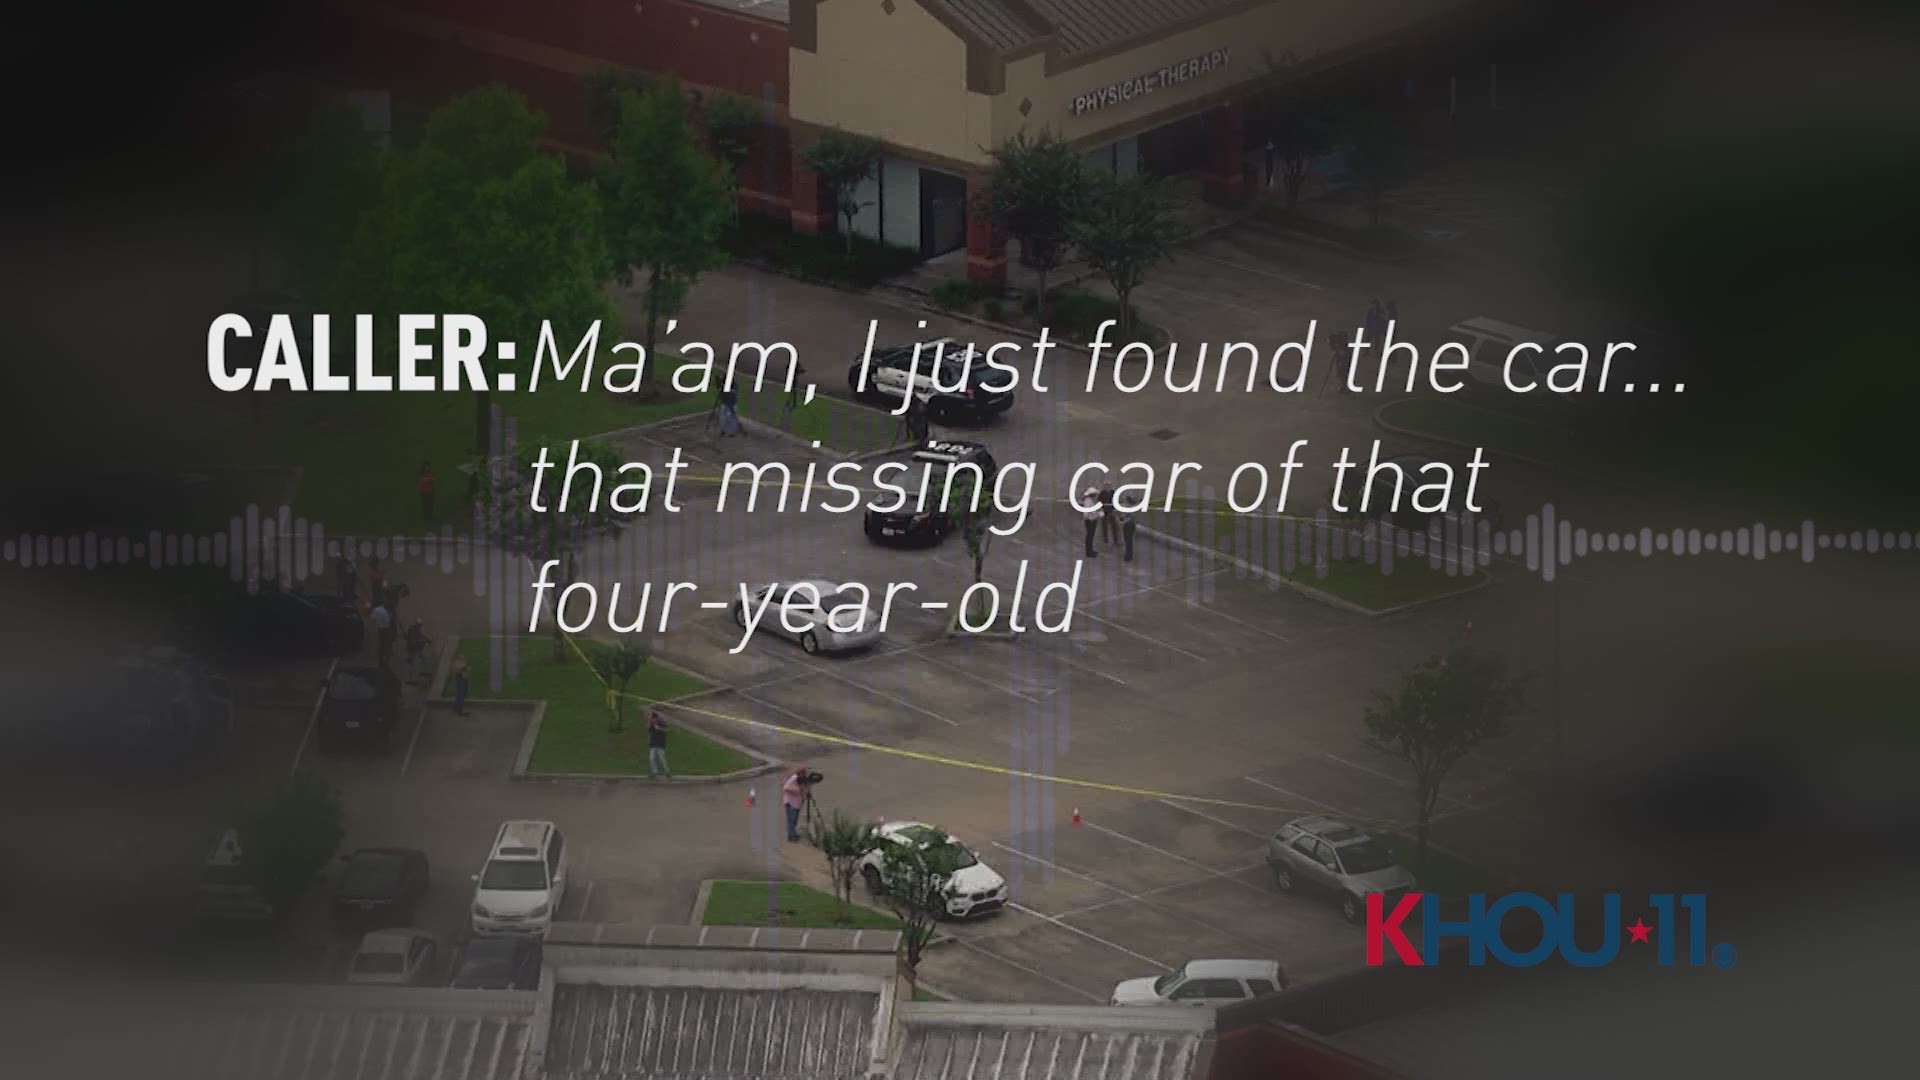 Hear the call a woman made to 911 after finding the car linked to the missing 4-year-old Maleah Davis' disappearance.